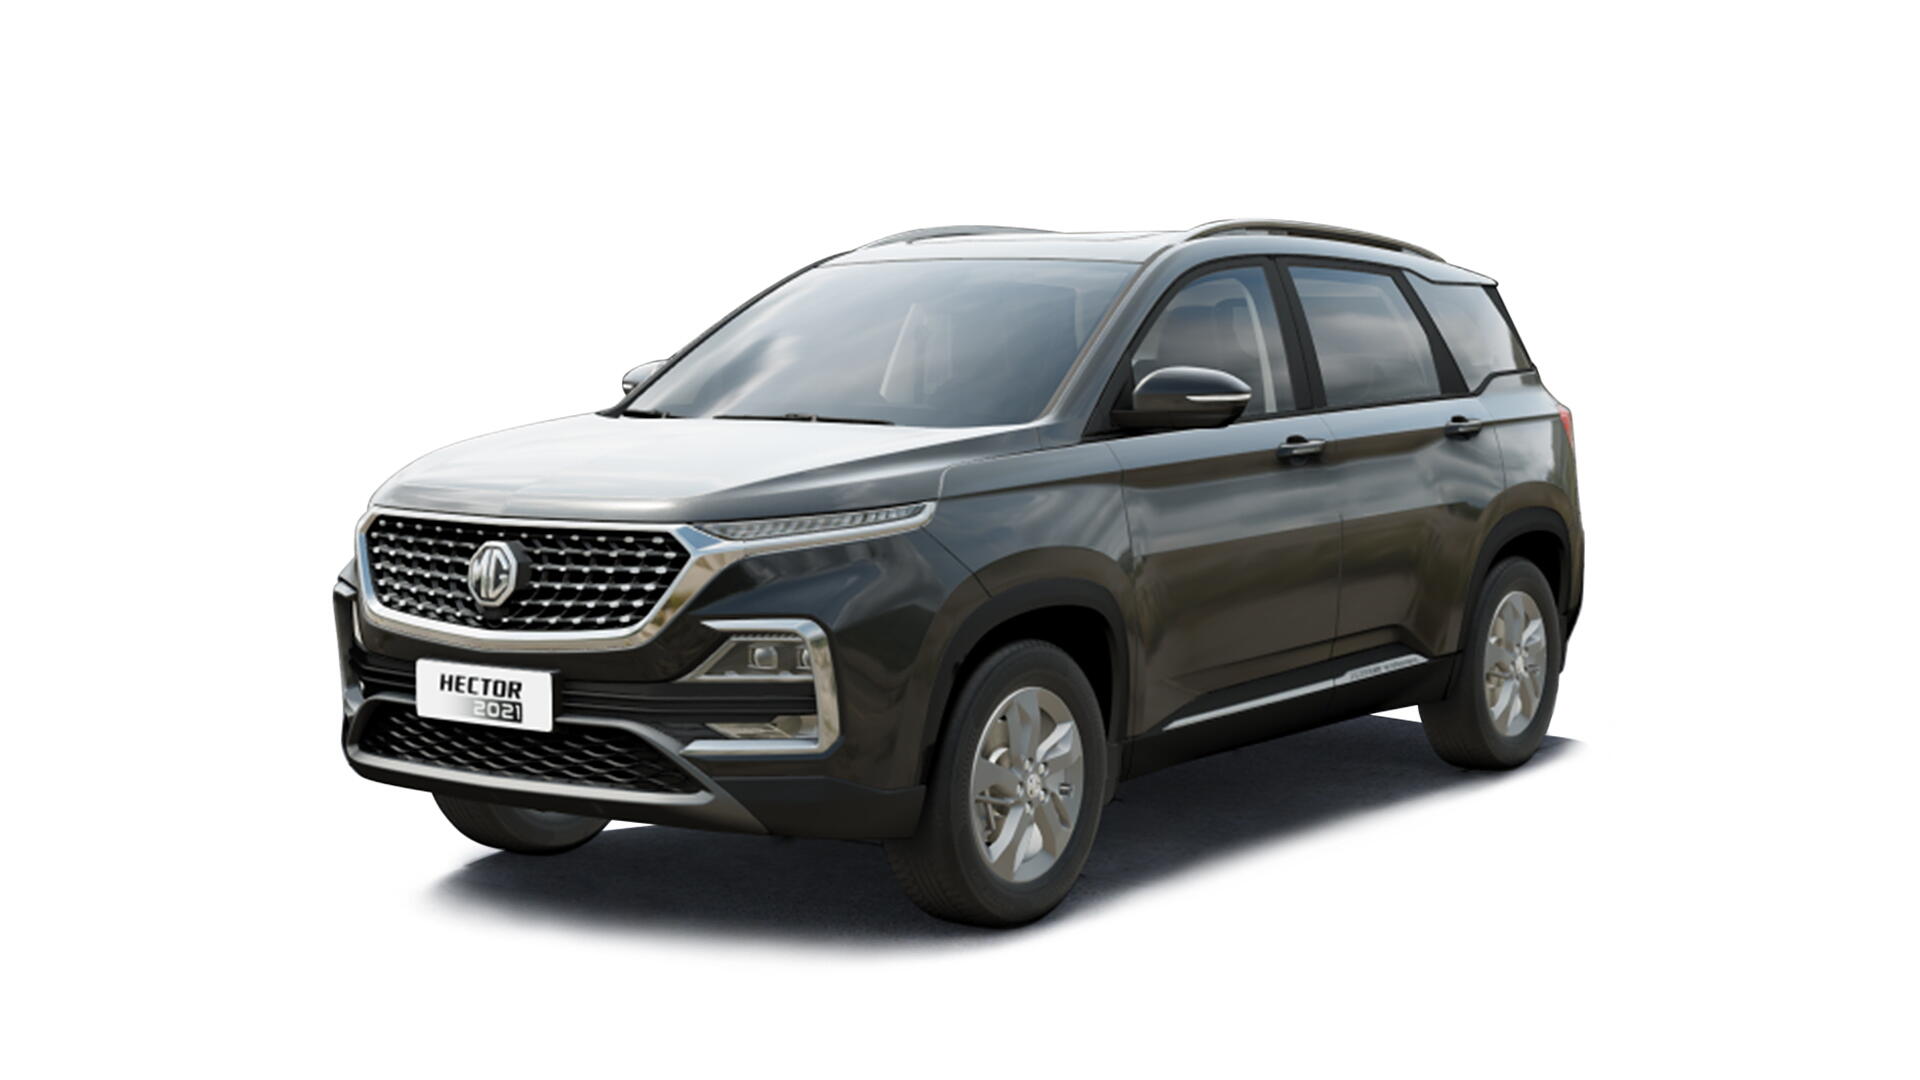 MG Hector Images